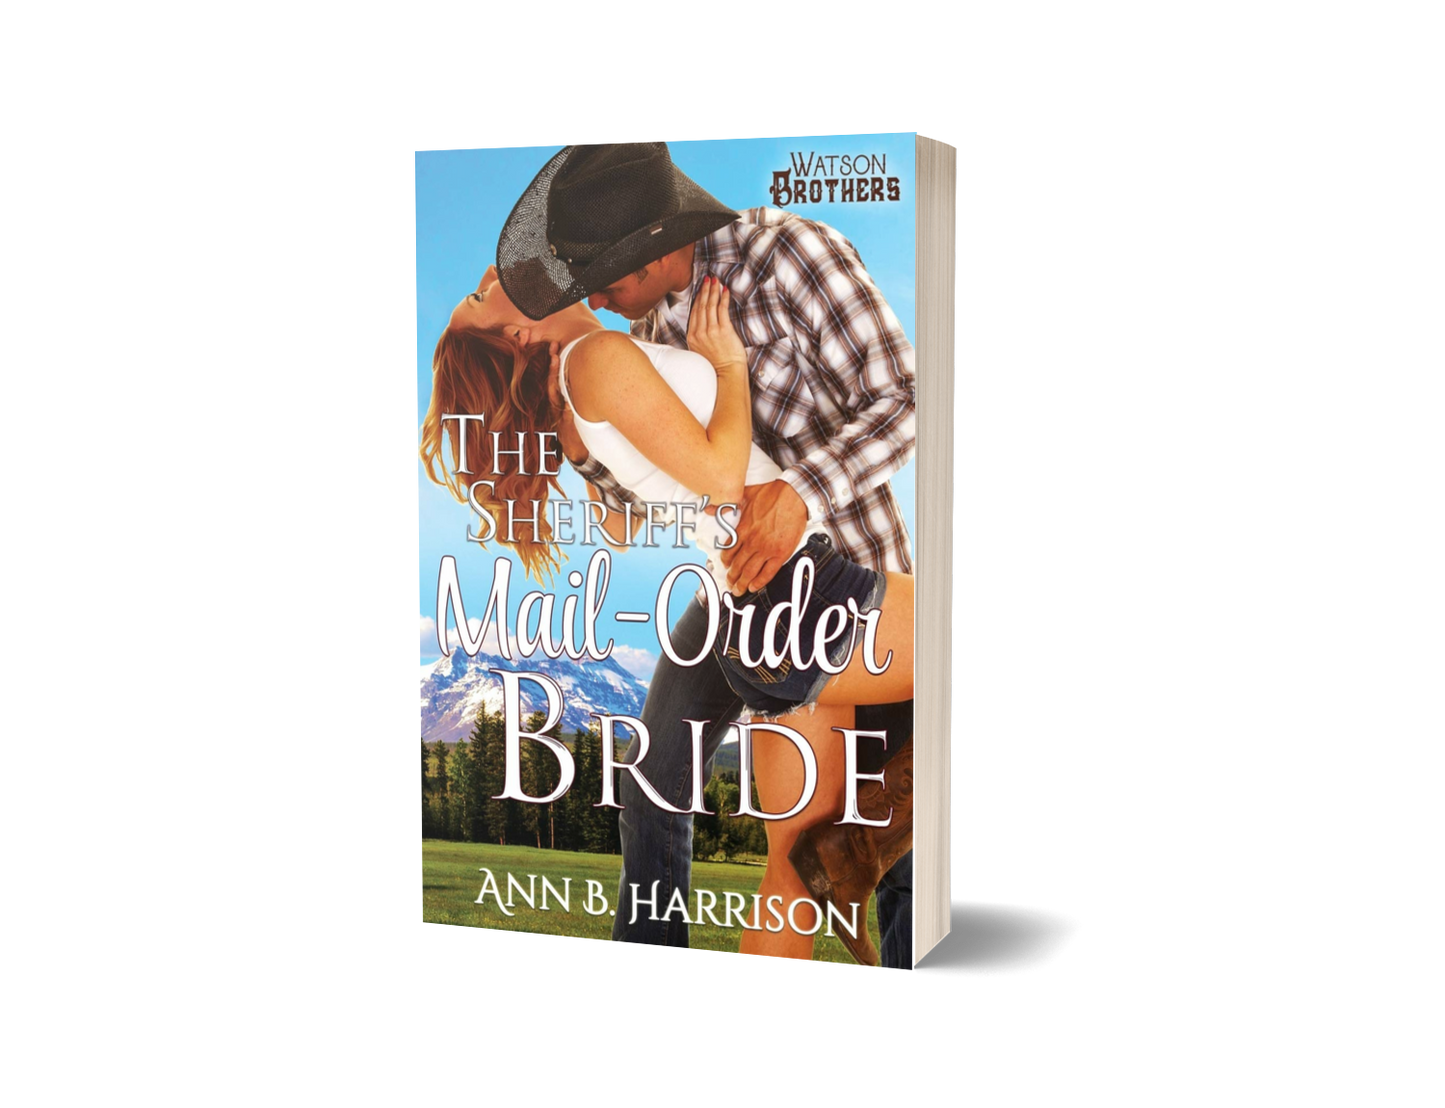 Watson Brothers | The Sheriff's Mail Order Bride - Print book signed by author